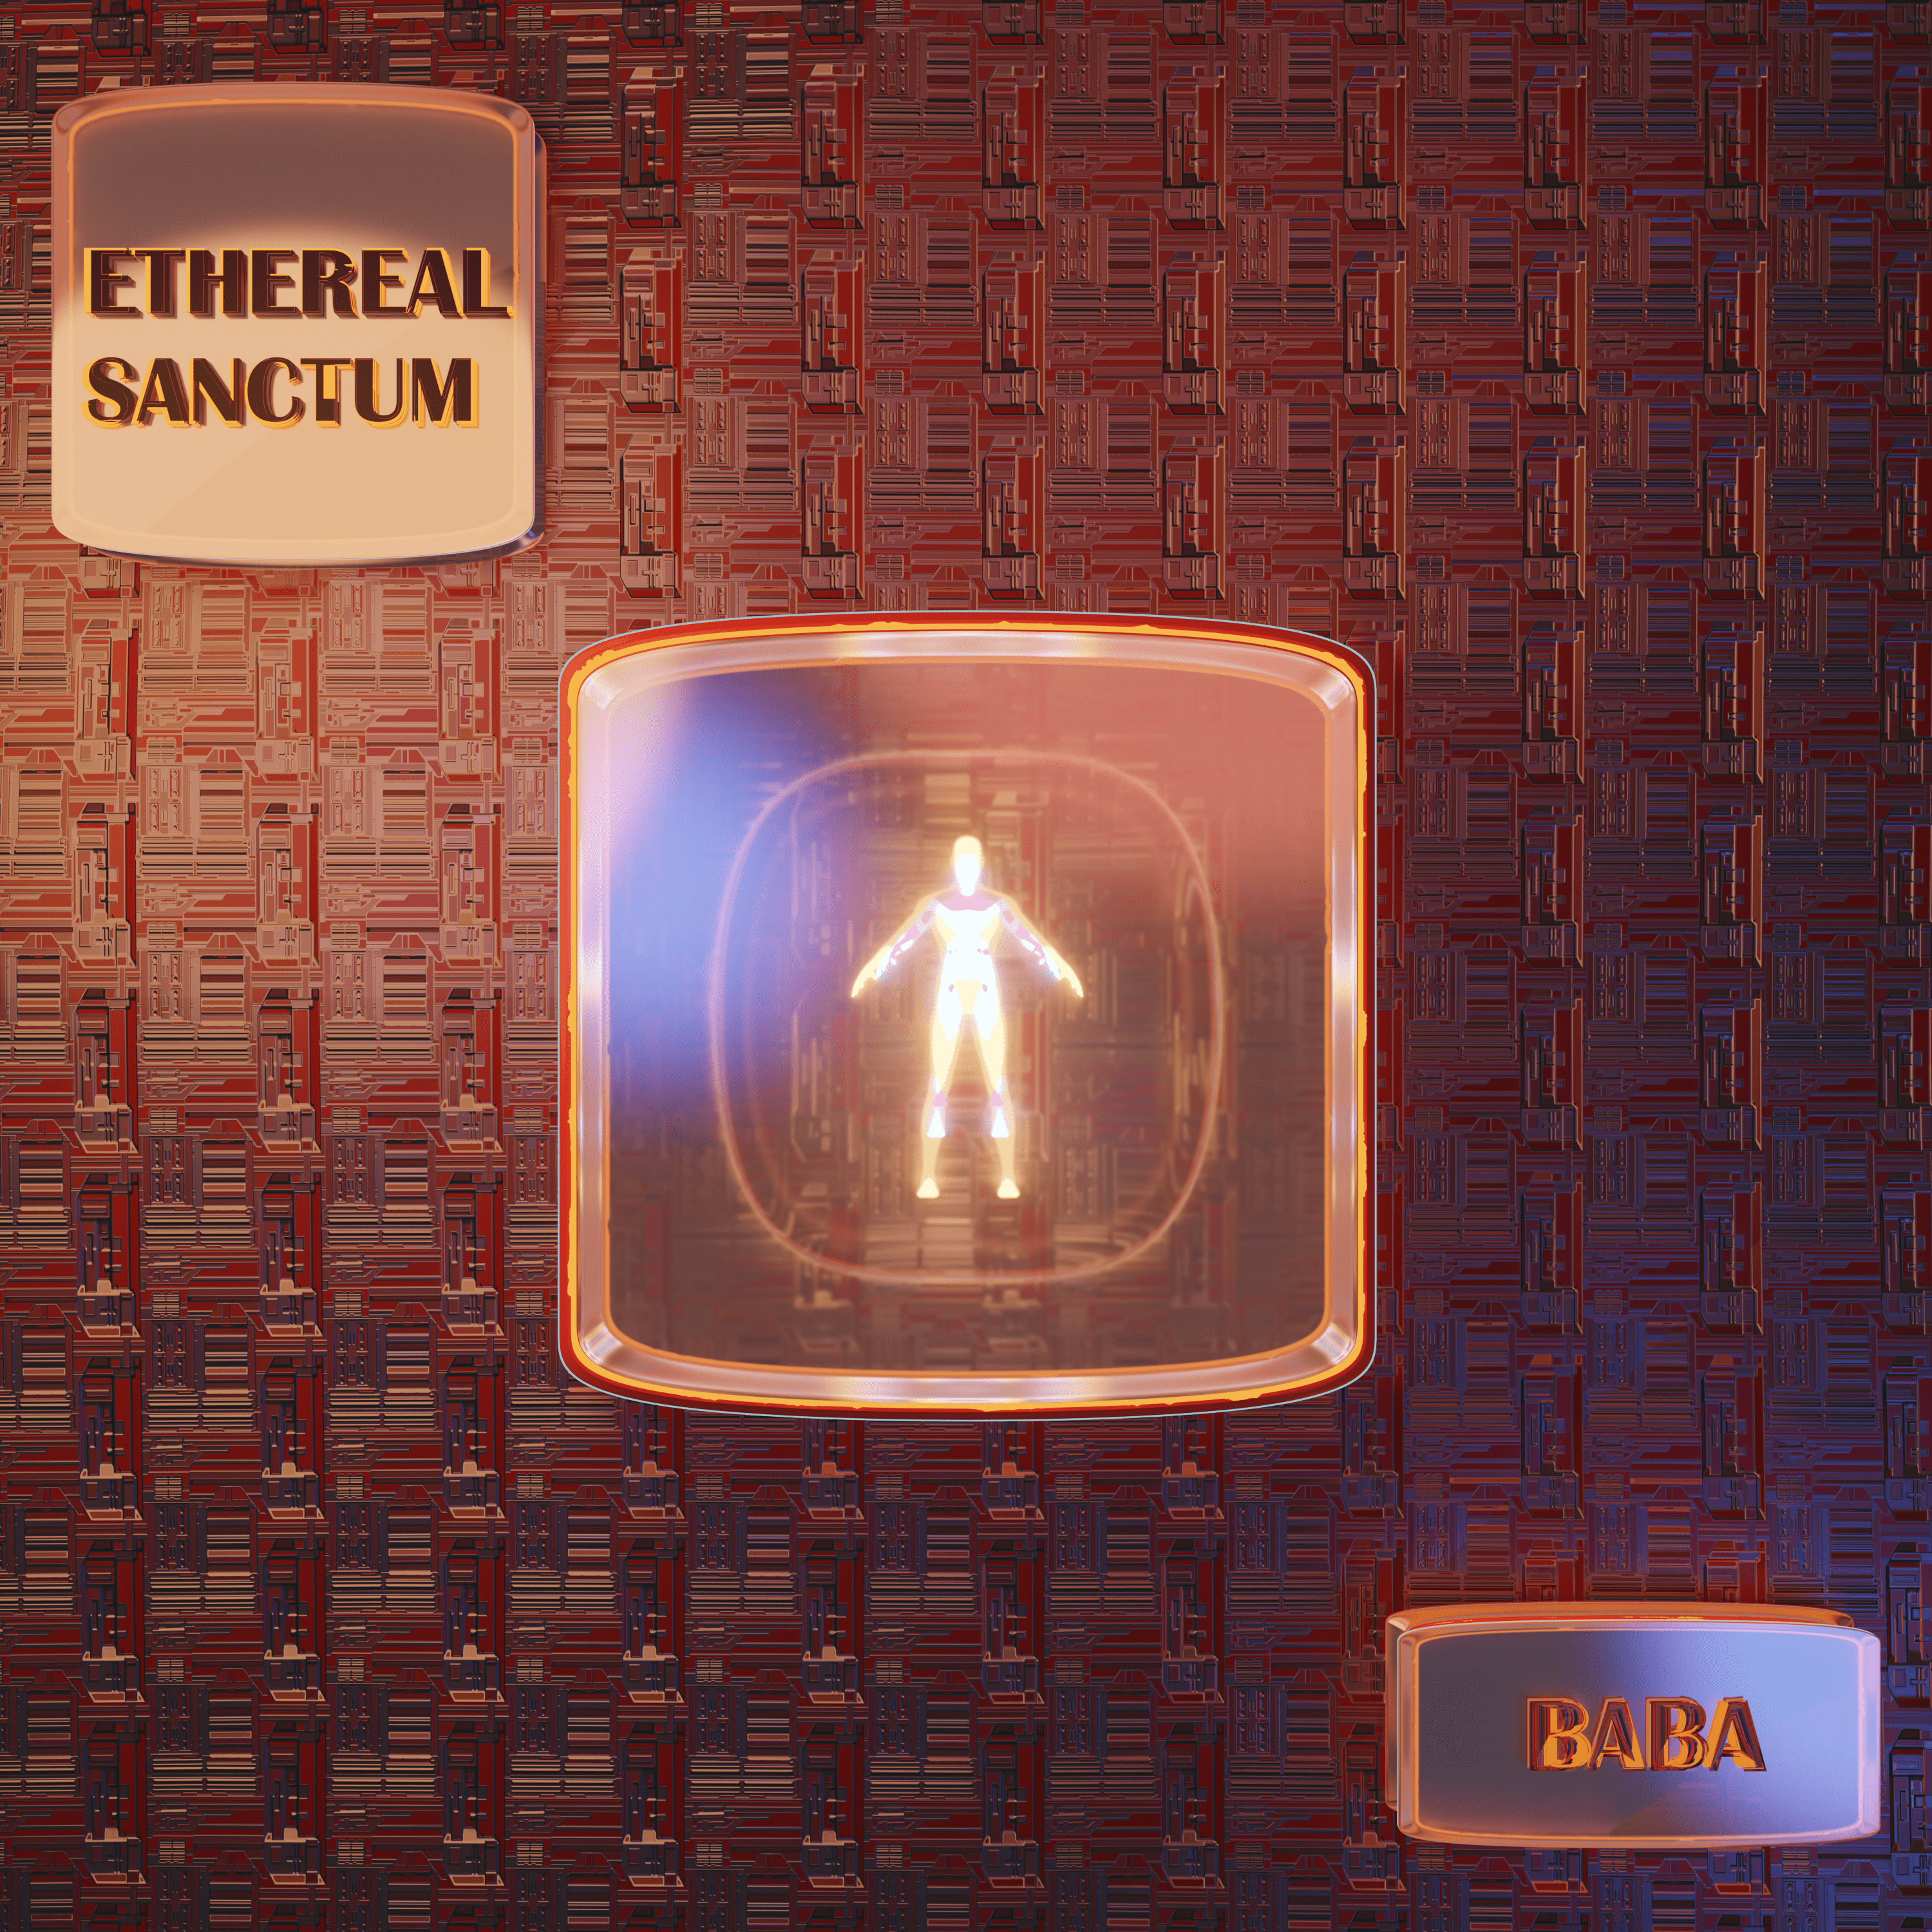 Cover art for Ethereal Sanctum by Baba